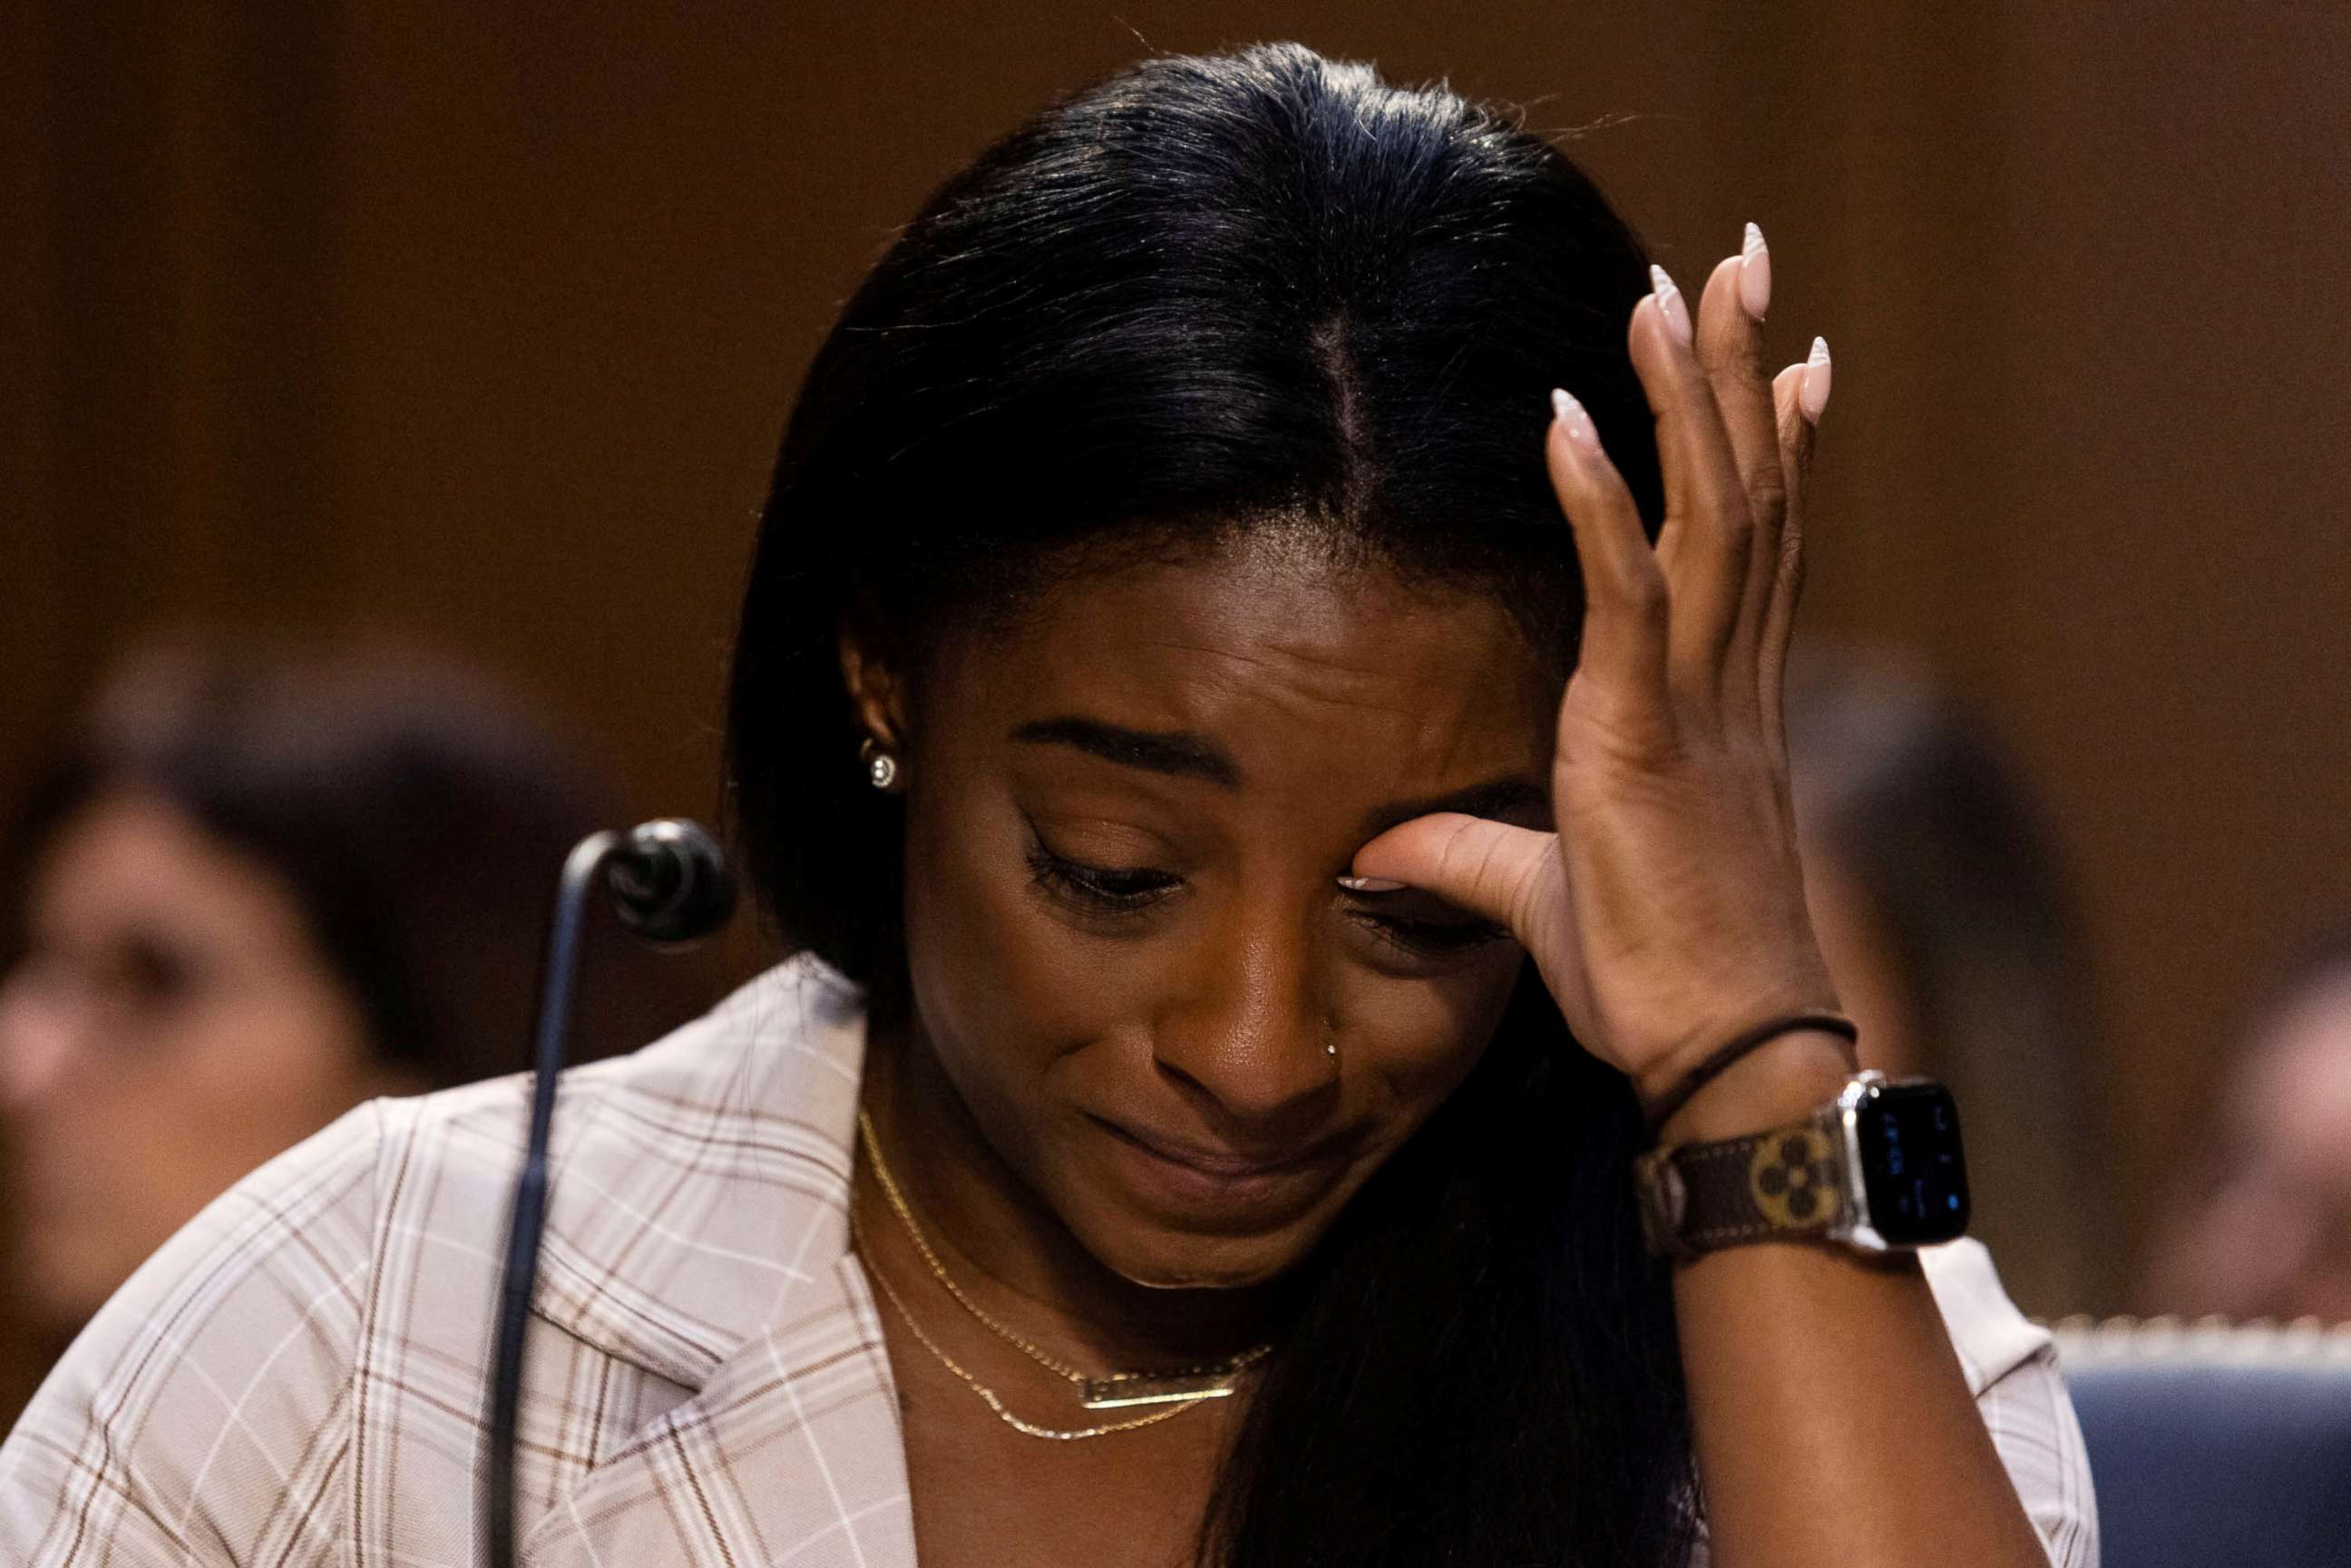 PHOTO: U.S. Olympic gymnast Simone Biles testifies during a Senate Judiciary hearing about the inspector general's report on the FBI handling of the Larry Nassar investigation of sexual abuse of Olympic gymnasts, in Washington, D.C., on Sept. 15, 2021.